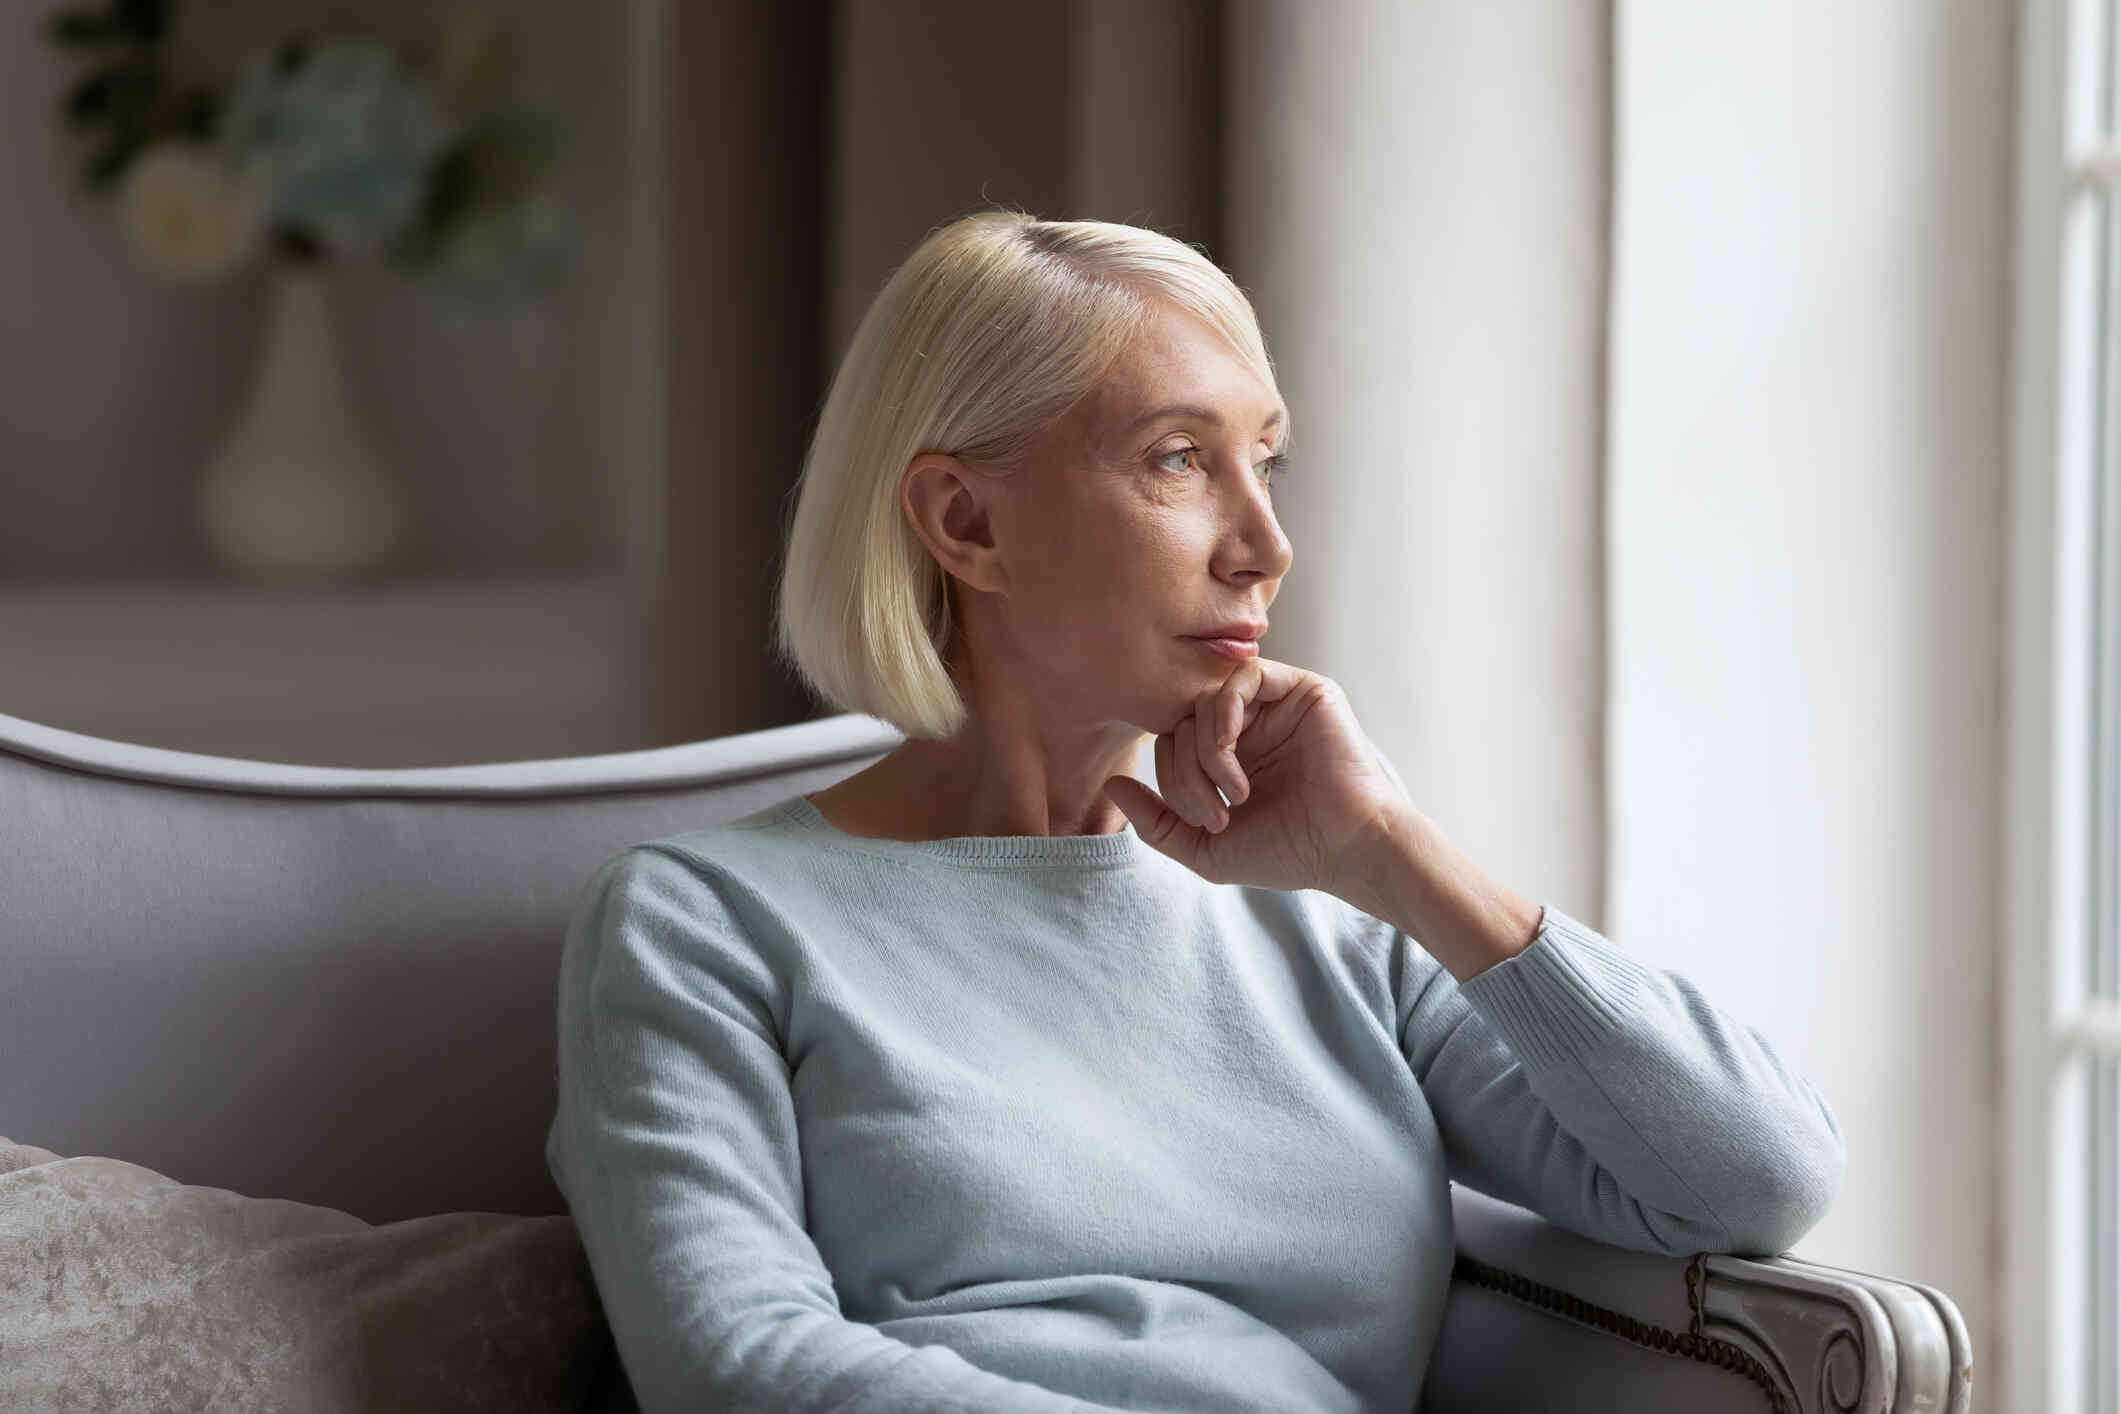 A woman in a light blue shirt sits in a grey armchair in her home and gazes out of the window while deep in thought.